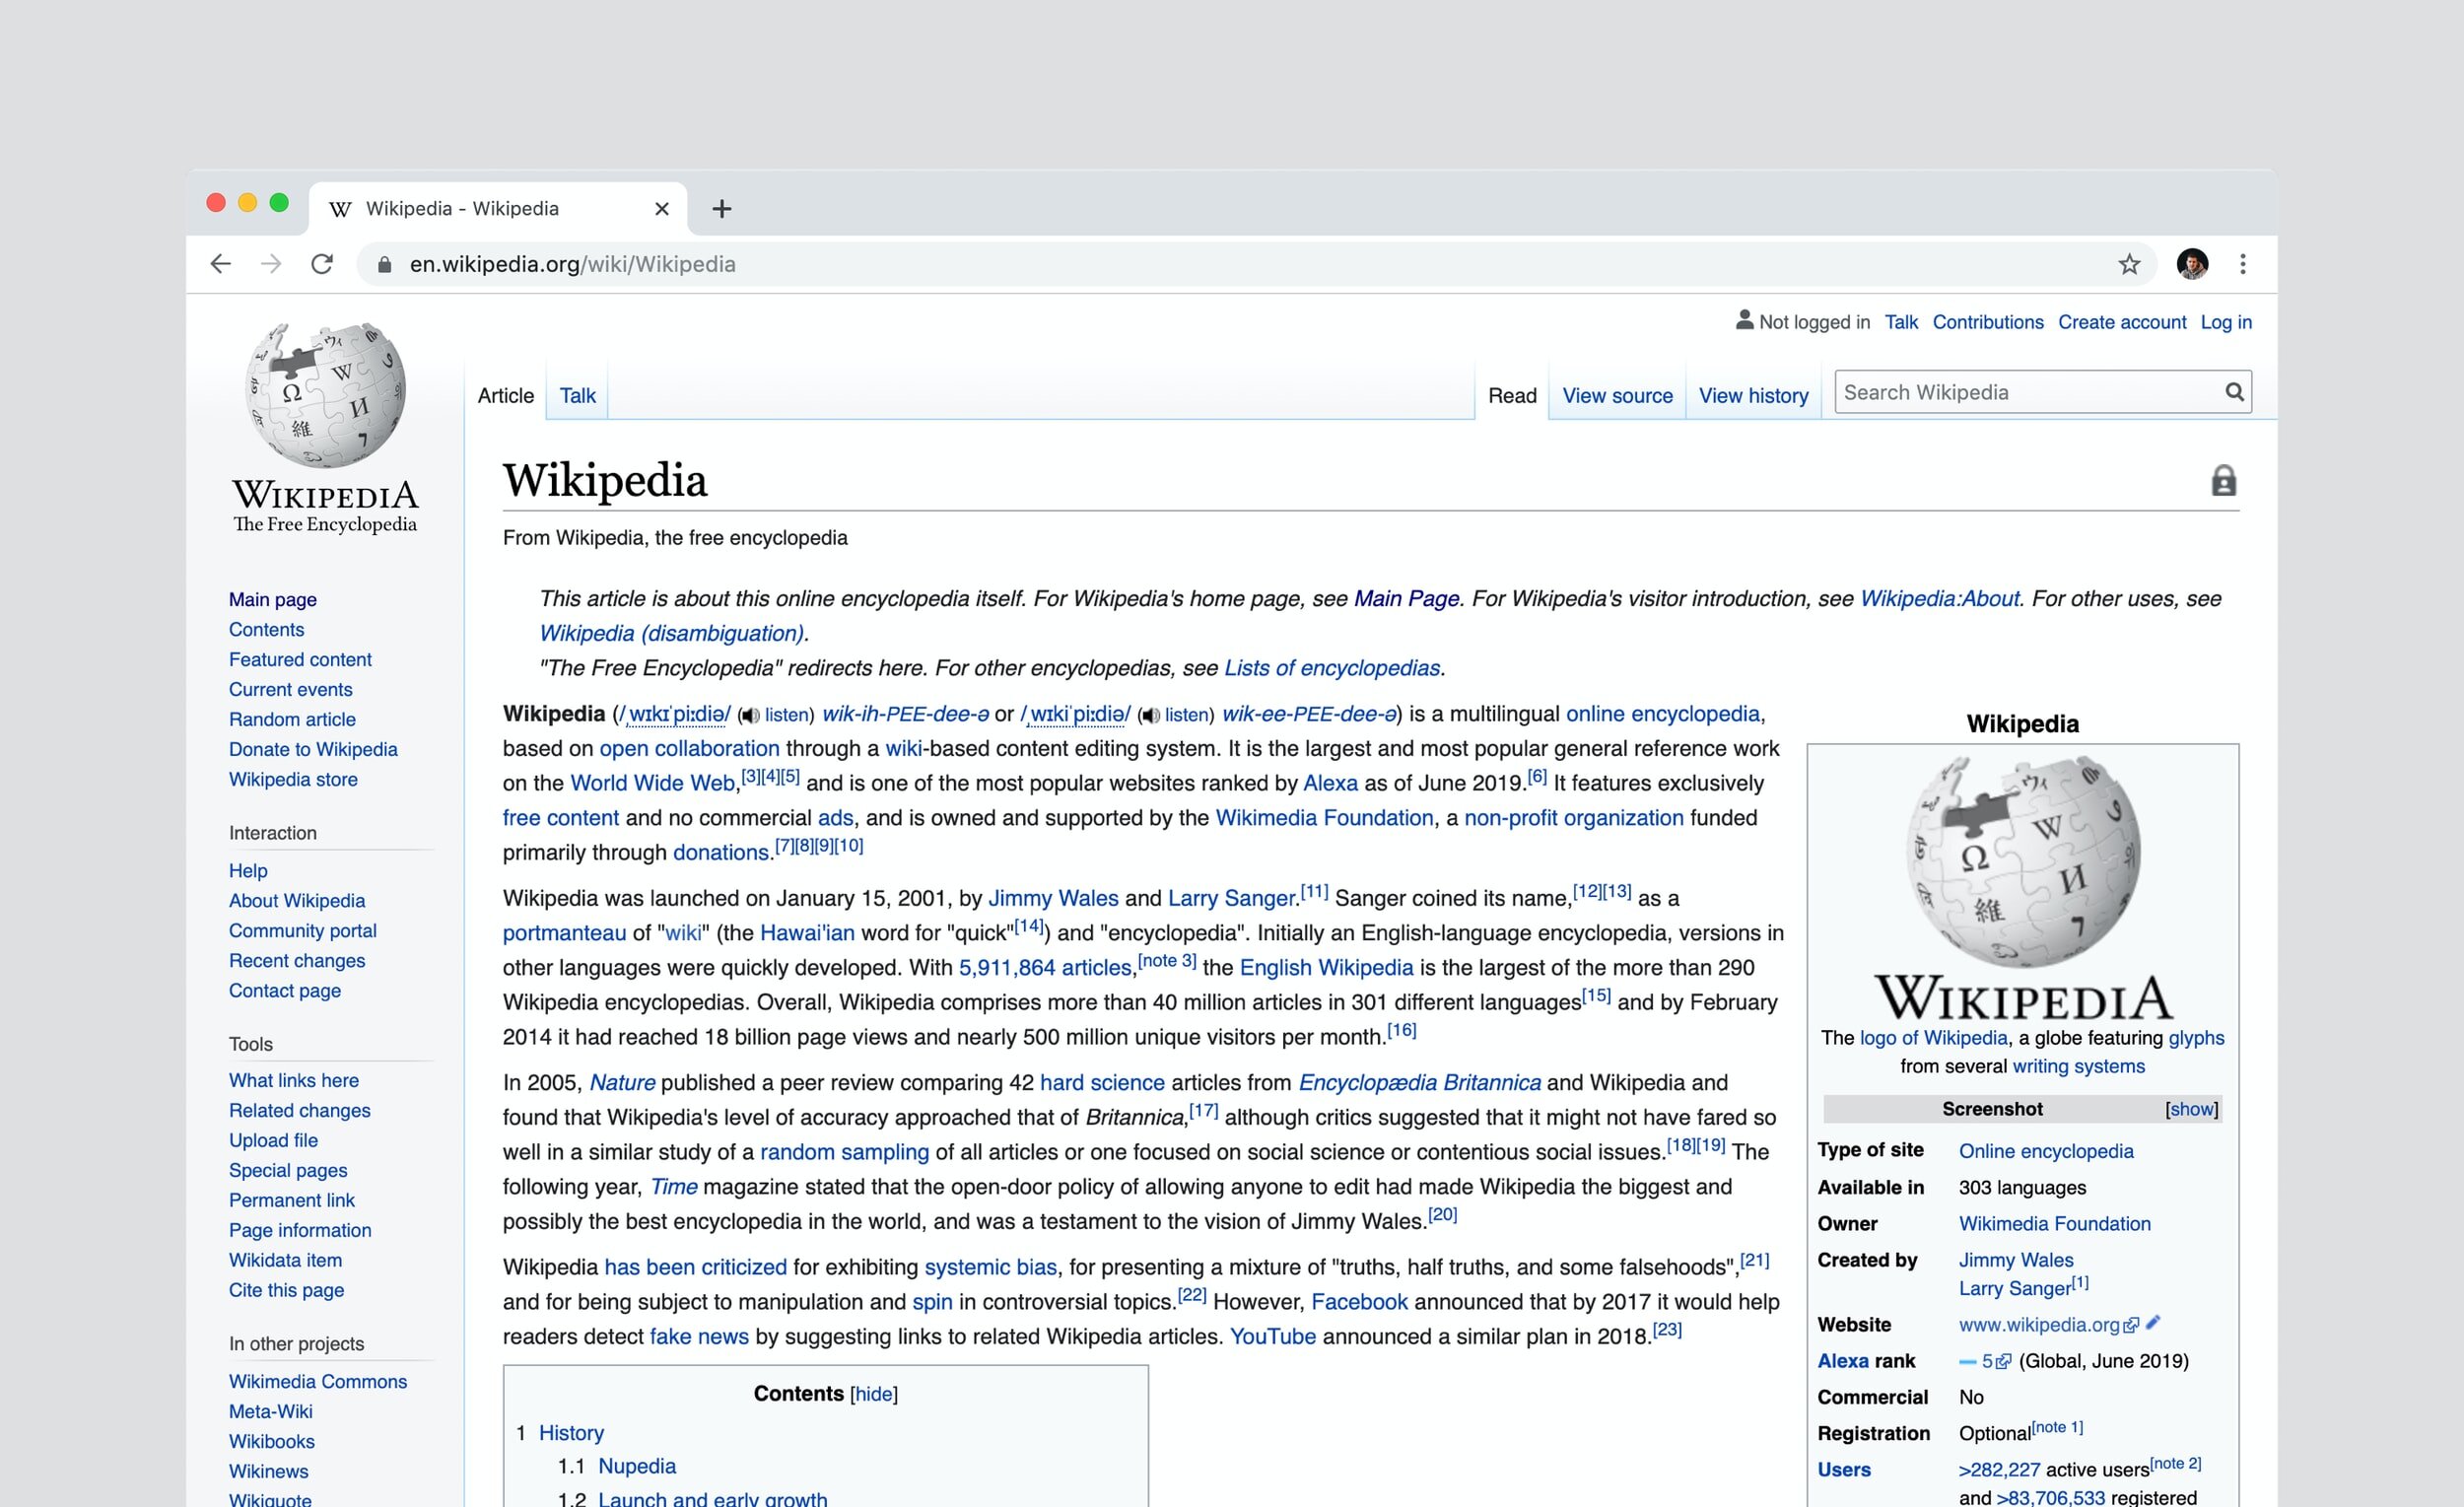 Why your Profs Hate Wikipedia and How to Research Your Way to an “A”